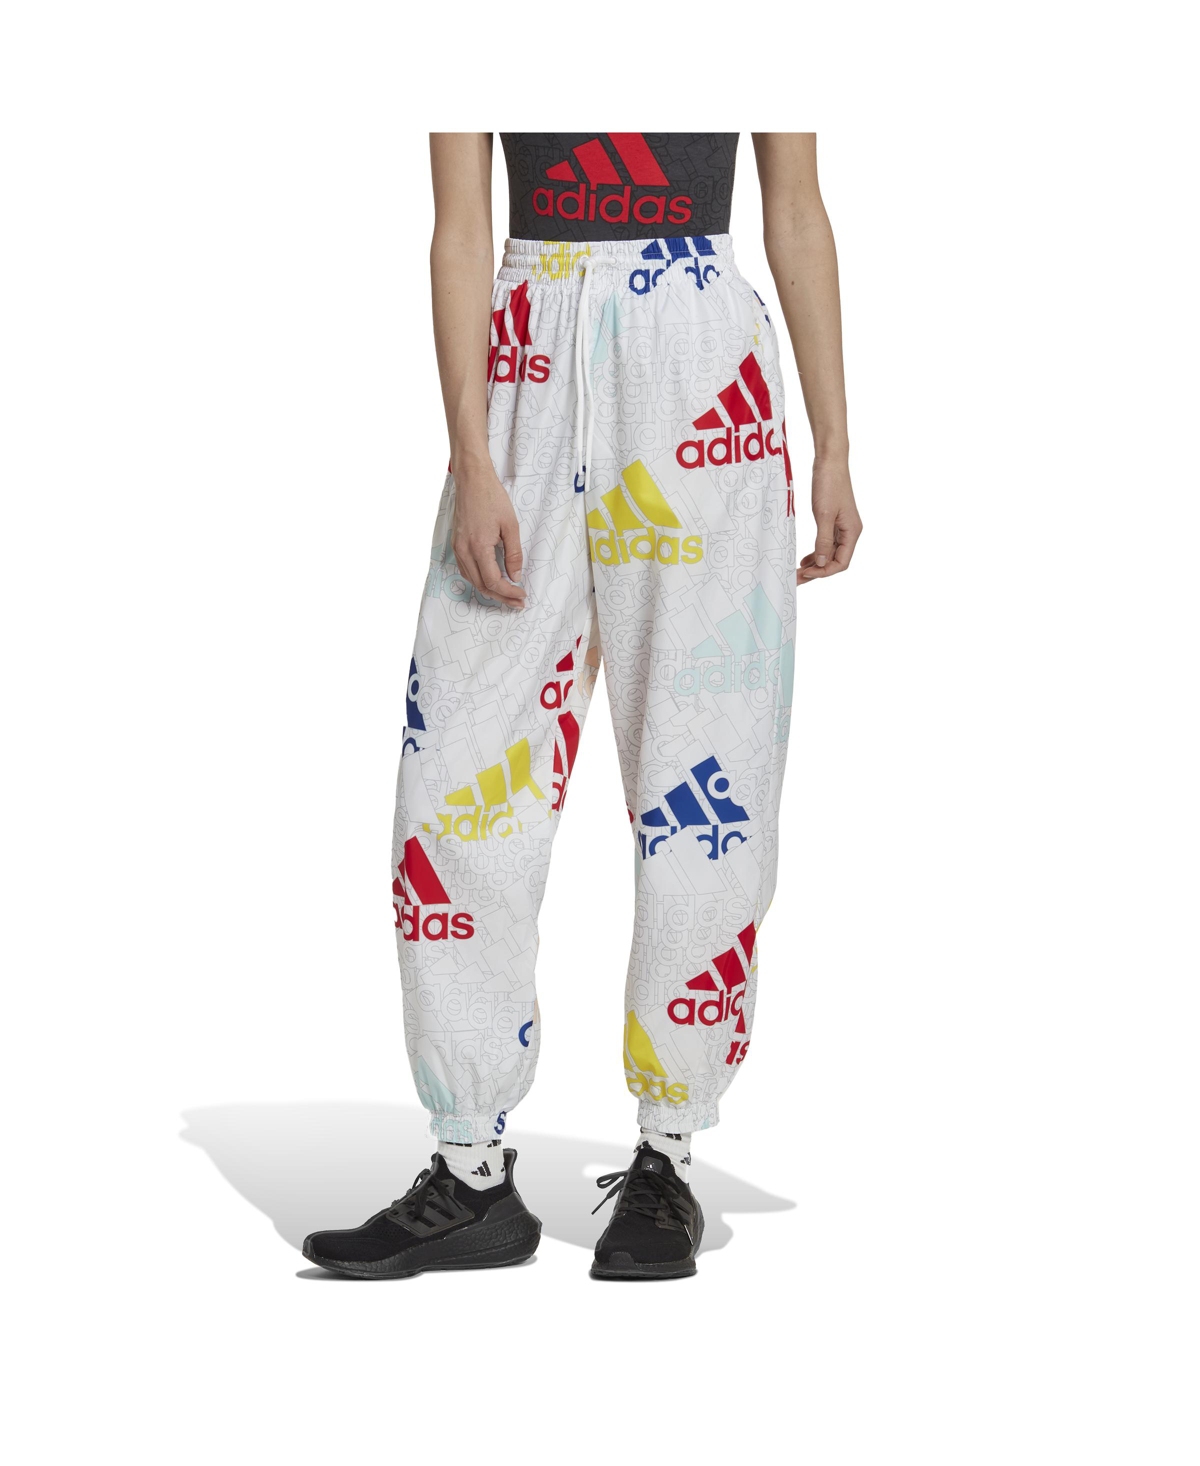  adidas Women's Essentials Multi-Colored Loose Fit Woven Pants